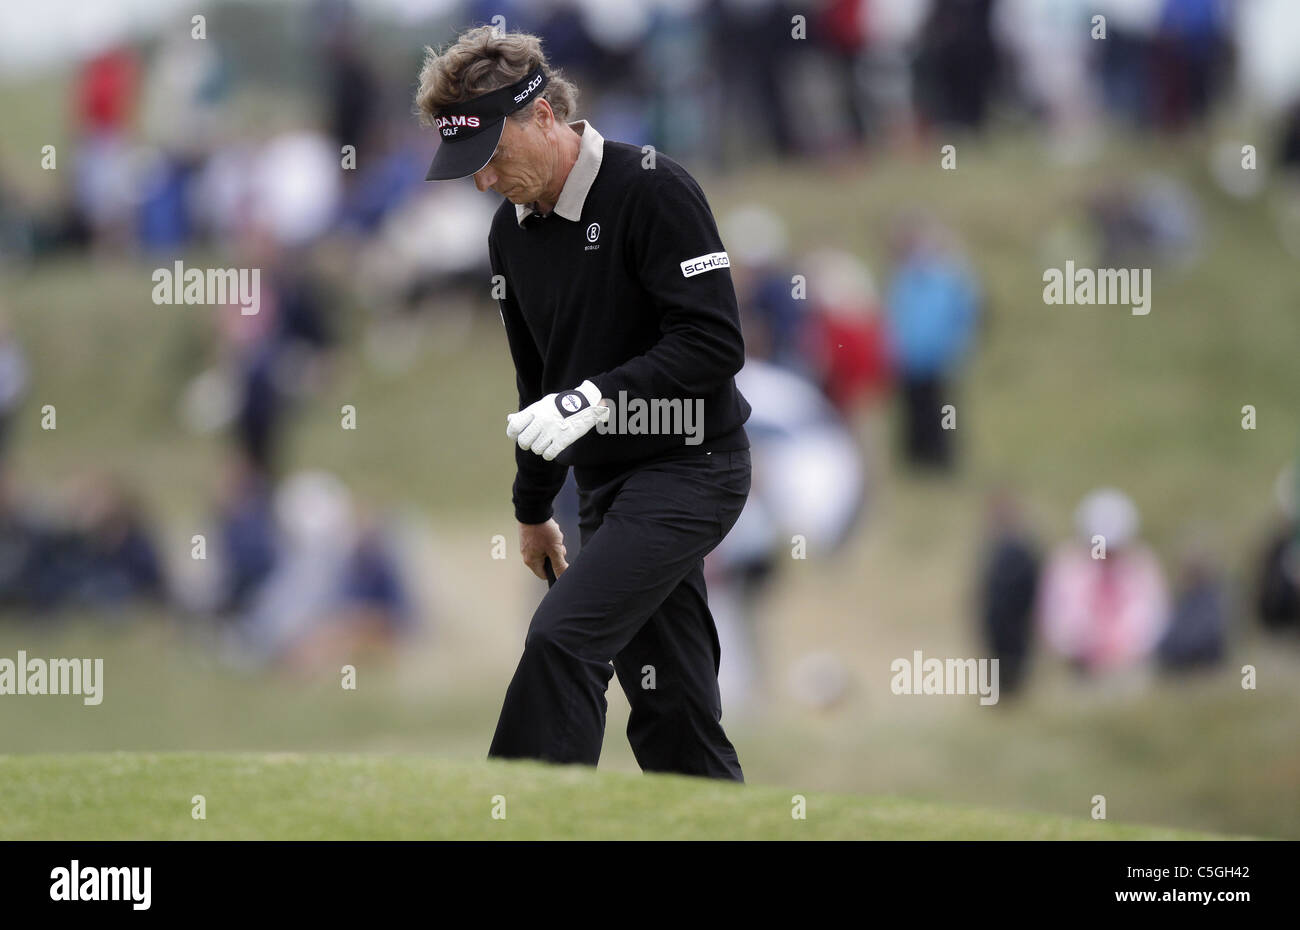 BERNHARD LANGER AFTER TAKING 8 THE OPEN CHAMPIONSHIP ROYAL ST.GEORGE'S SANDWICH KENT ENGLAND 14 July 2011 Stock Photo